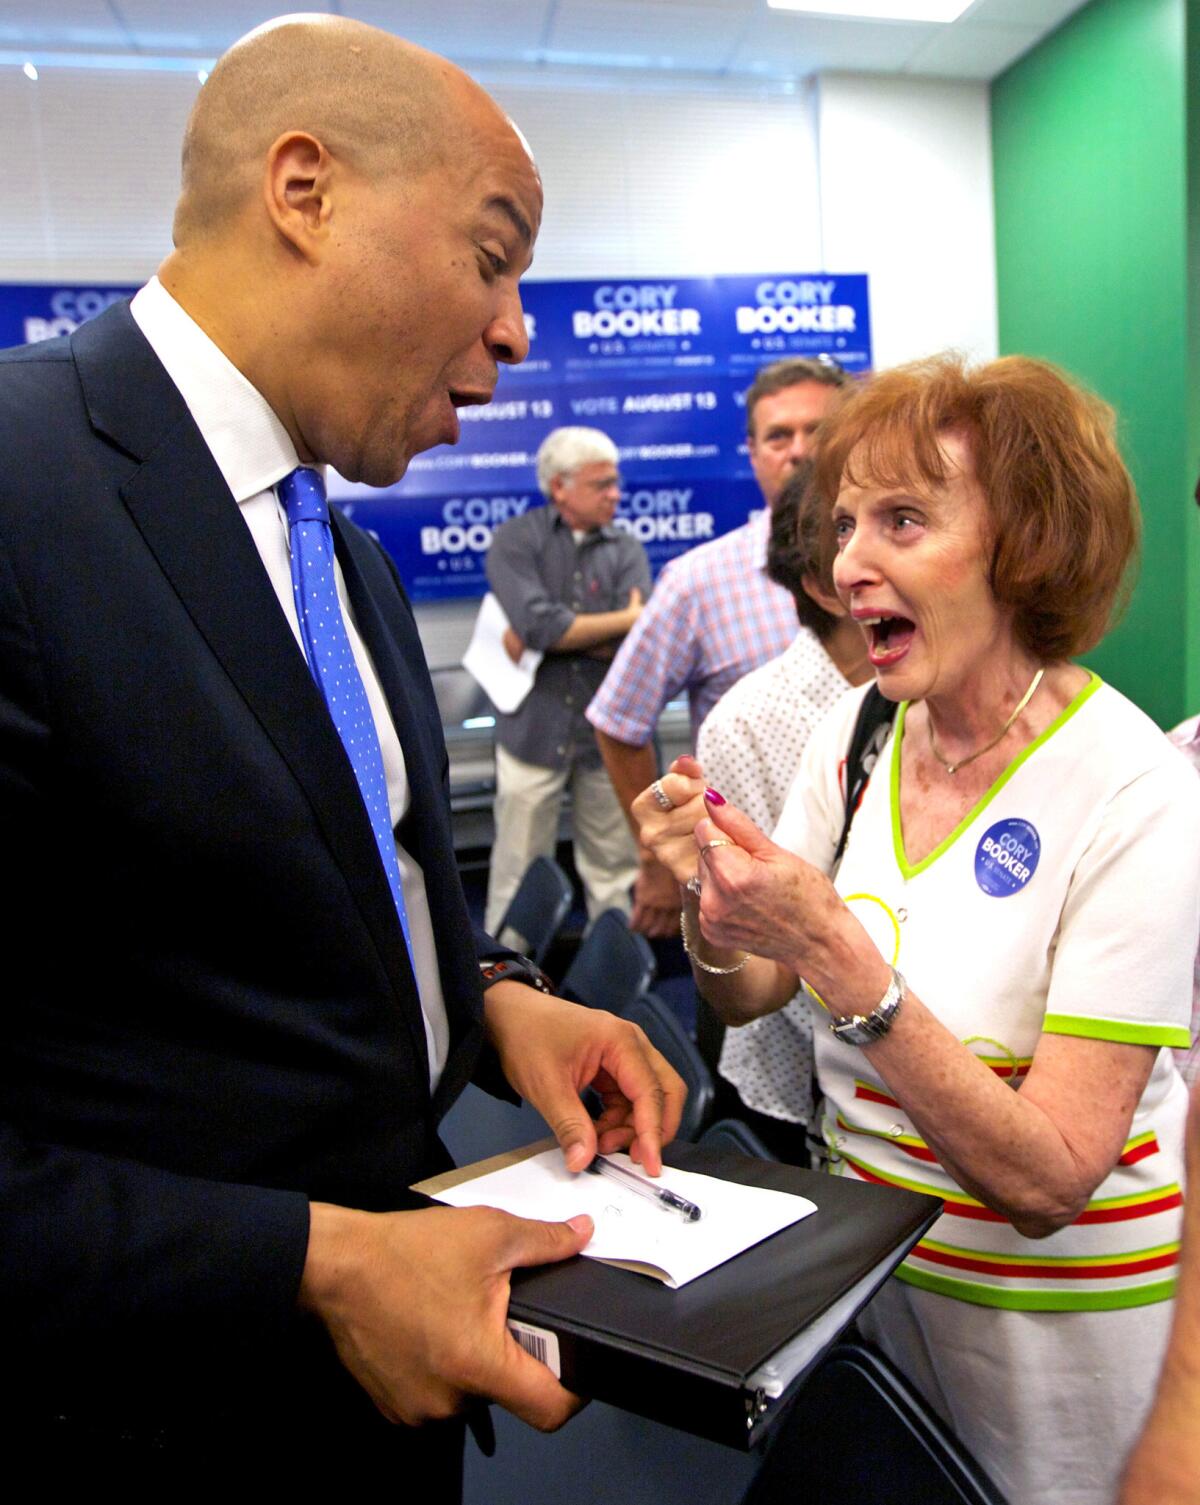 U.S. Senate candidate Cory Booker talks with Joyce Kemp, of Fair Lawn, N.J. after a campaign speech during the run-up to the primary.